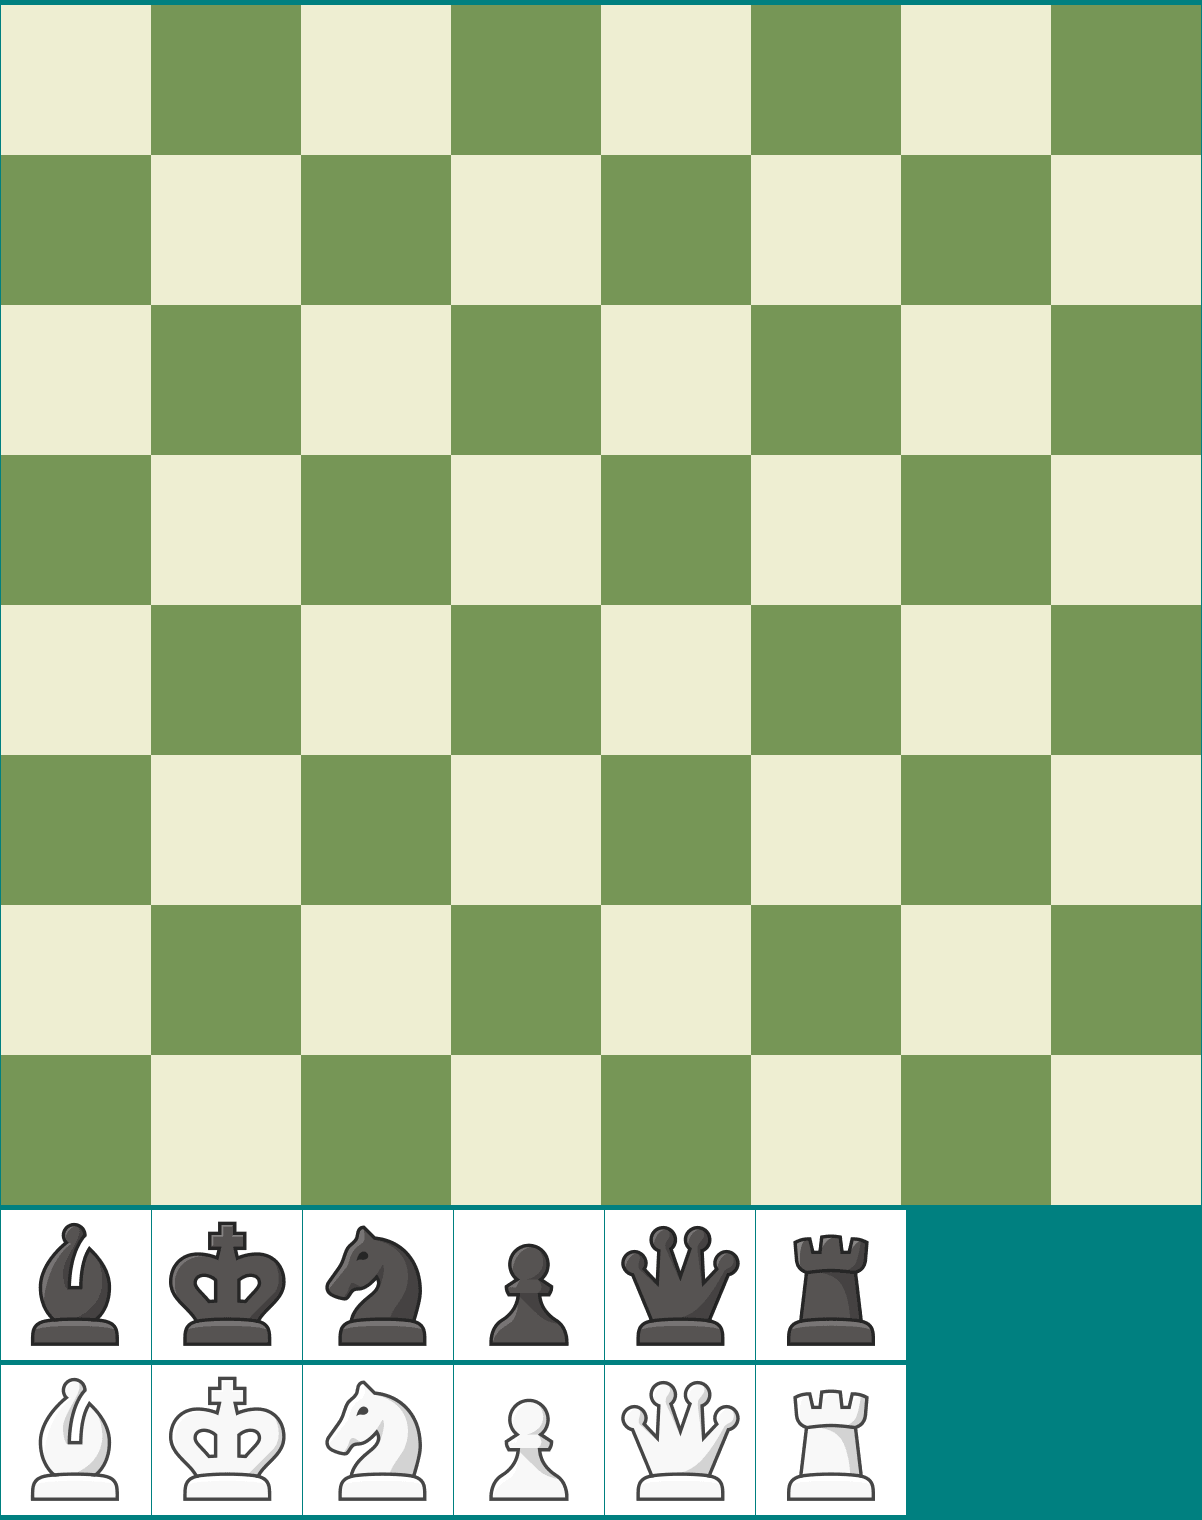 Chess - Board and Chess Pieces (Standard/Classic)